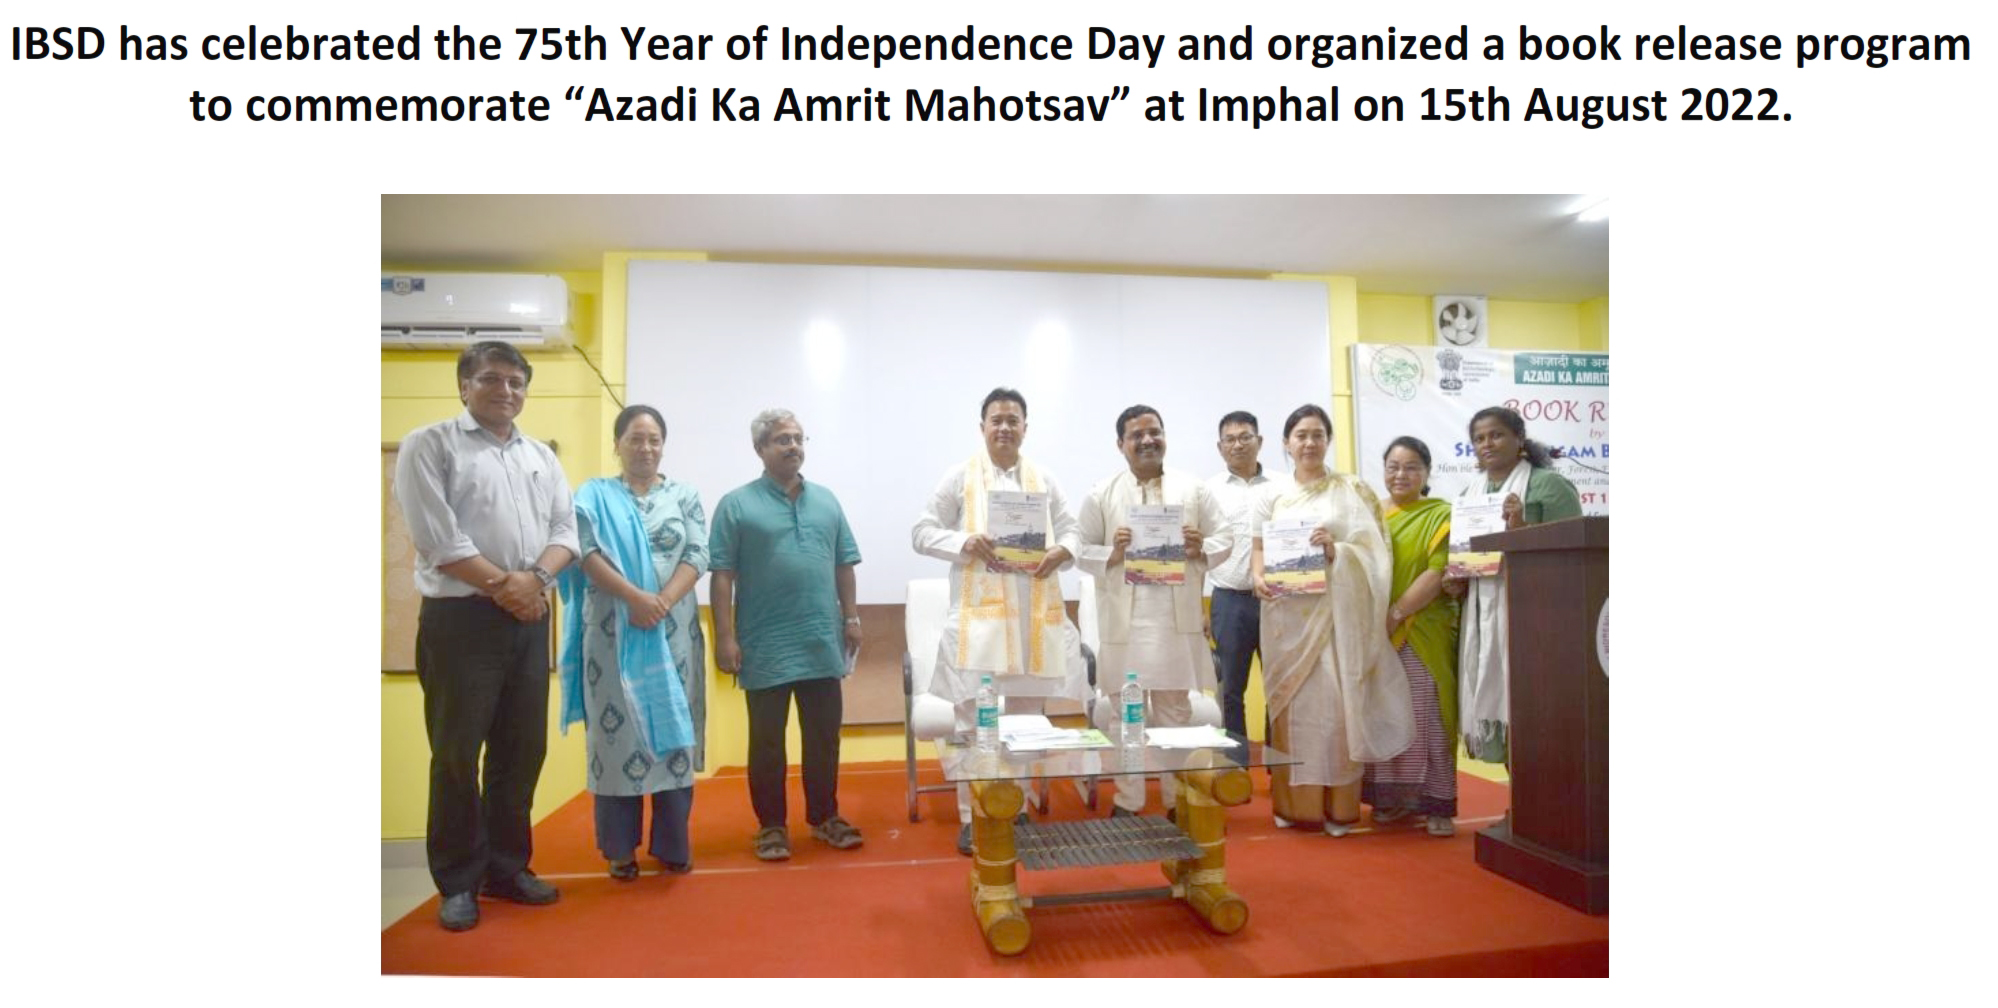 IBSD has celebrated the 75th Year of Independence Day and organized a book release program to commemorate “Azadi Ka Amrit Mahotsav” at Imphal on 15th August 2022.photos